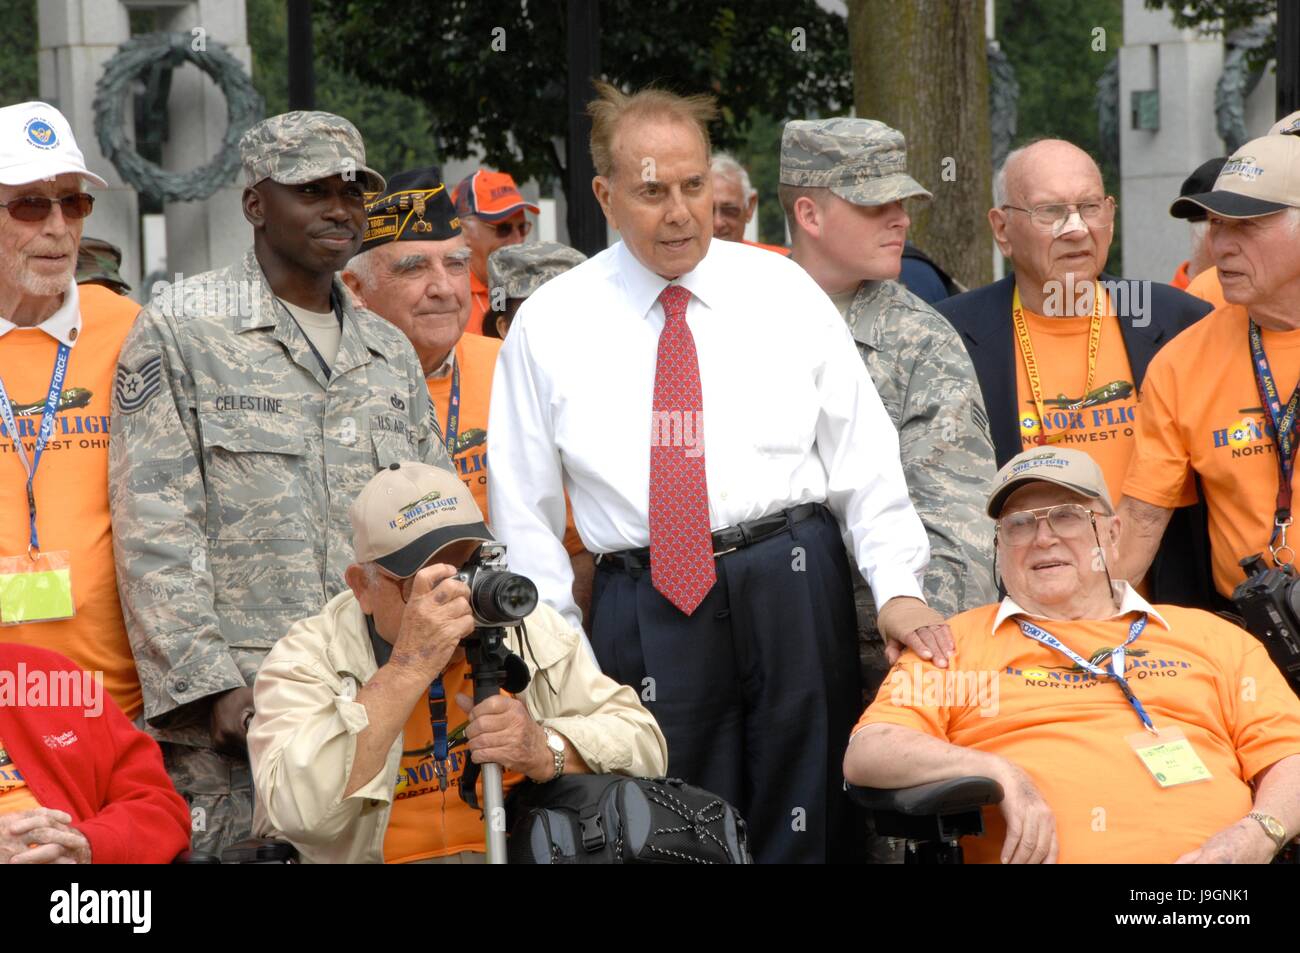 Former U.S. Senator and veteran Bob Dole, center, poses for a group photo with World War II veterans from the Northwest Ohio division of the 2009 Honor Flight World War II Memorial Tour September 16, 2009 in Washington, DC. Honor Flight is a volunteer program that brings veterans to Washington to visit the World War II memorial. Stock Photo